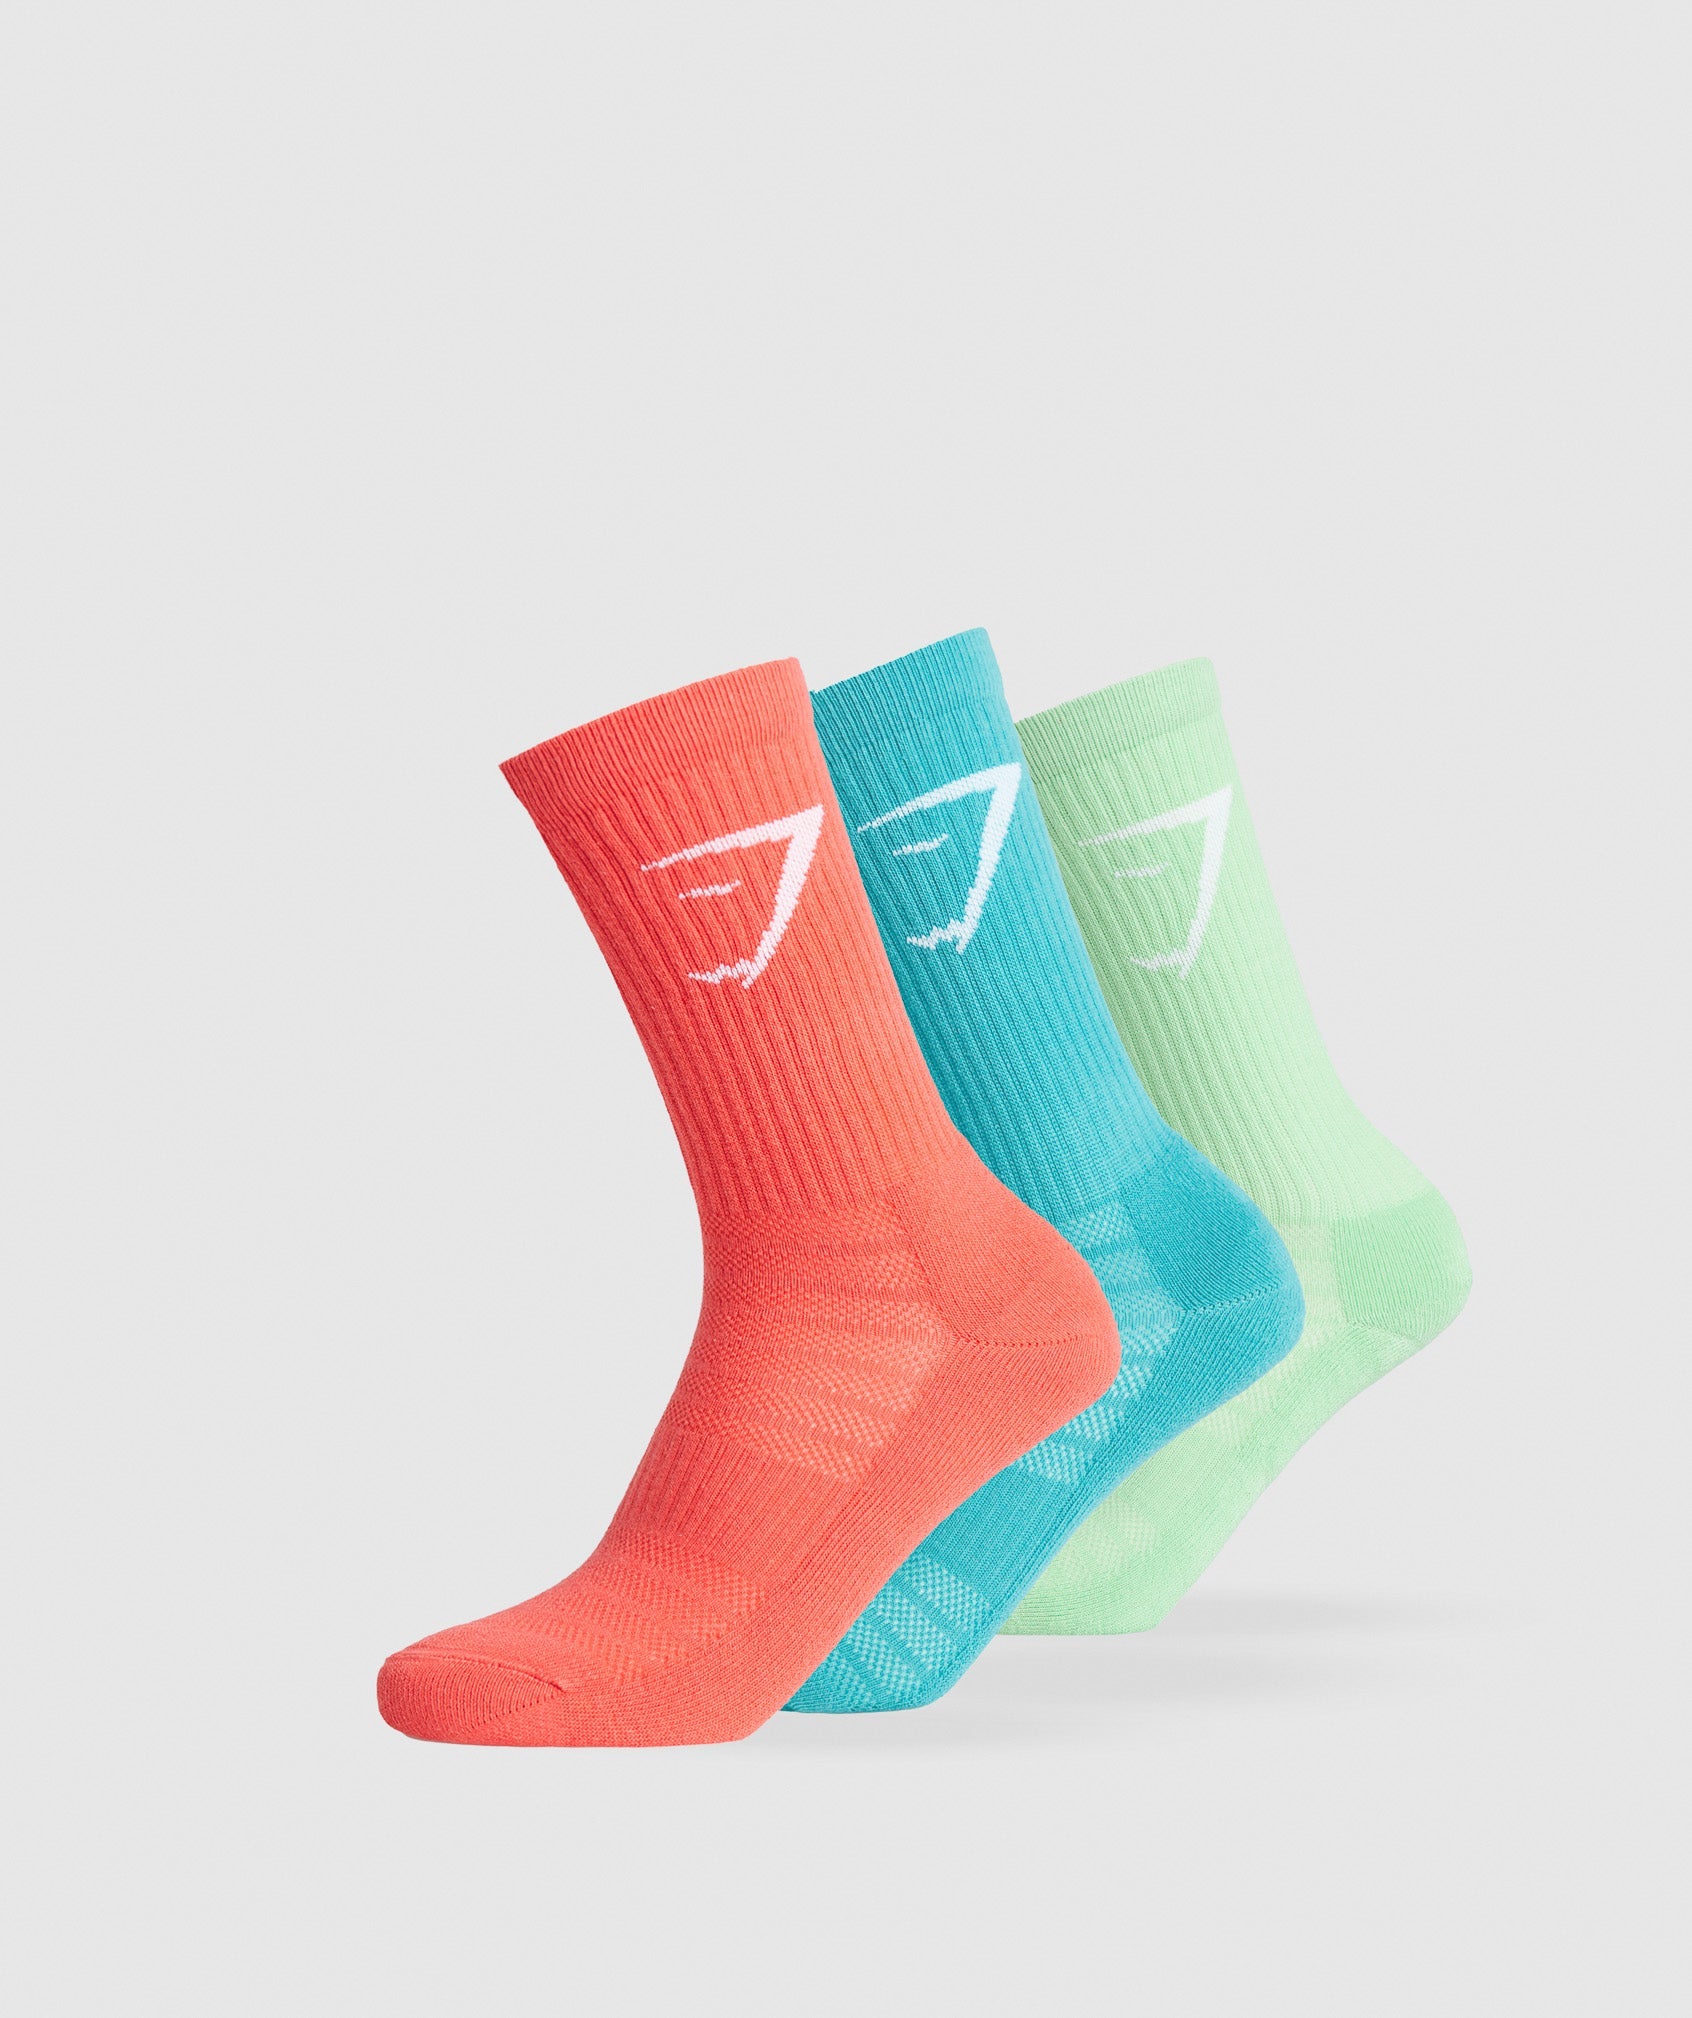 Crew Socks 3pk in Wannabe Orange/Artificial Teal/Bring It Green is out of stock